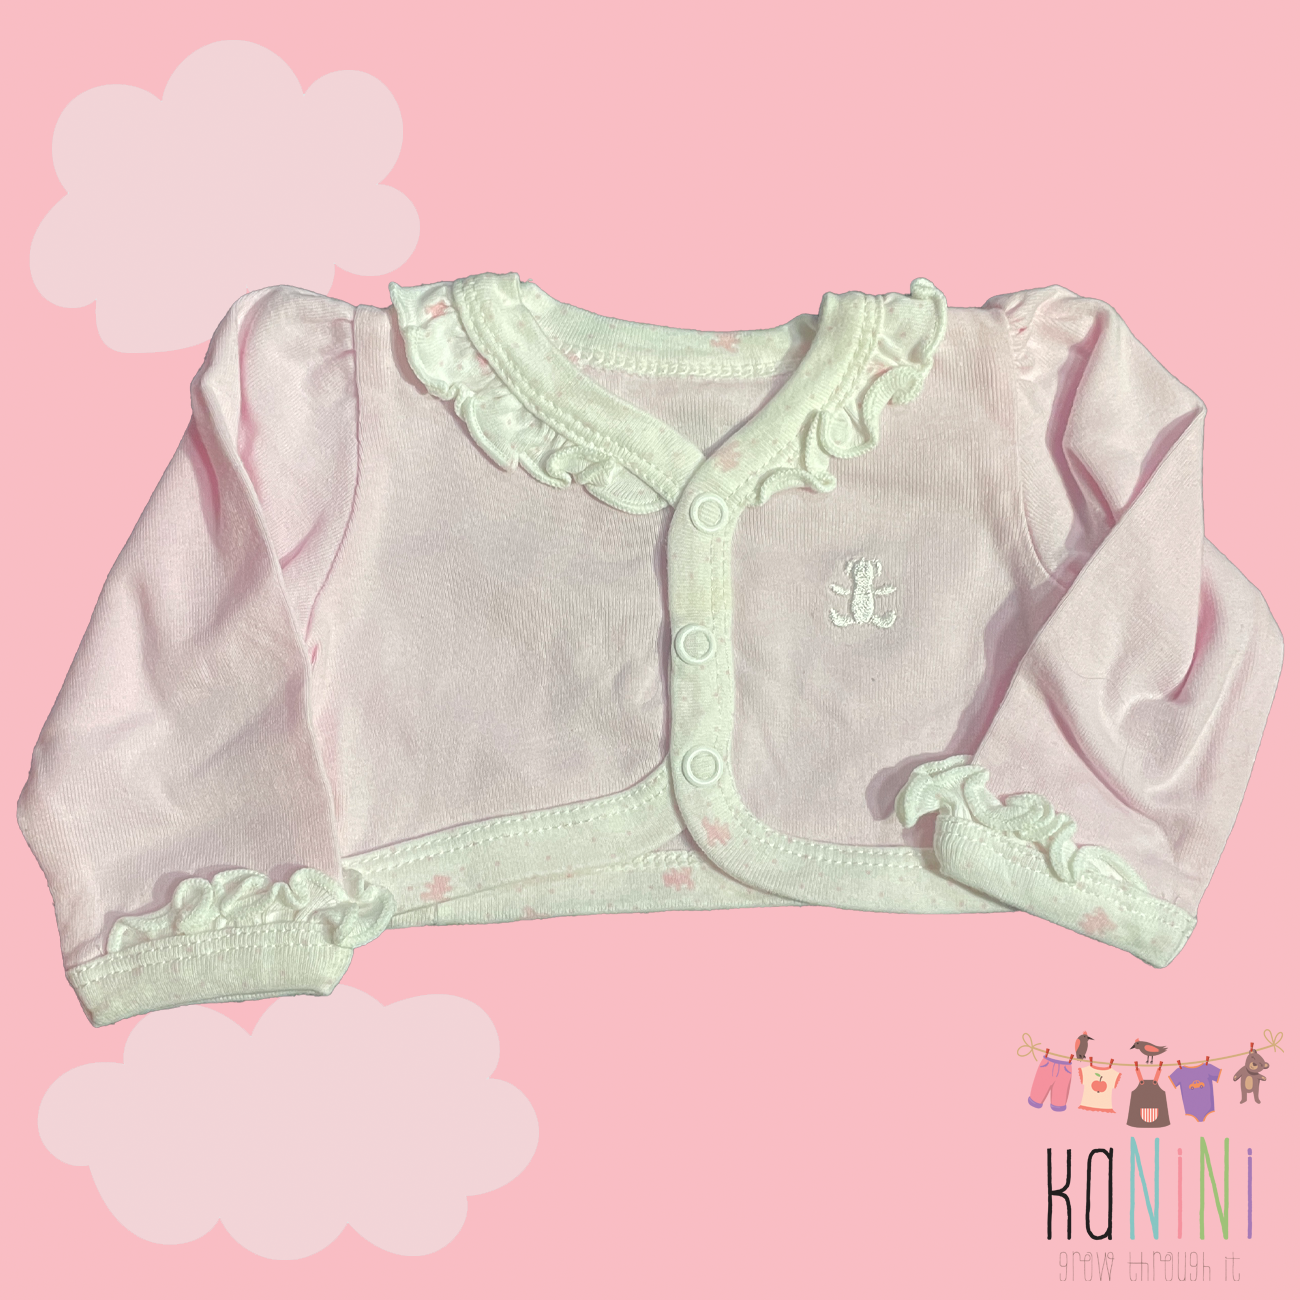 Featured image for “Woolworths Newborn Girls Cardigan”